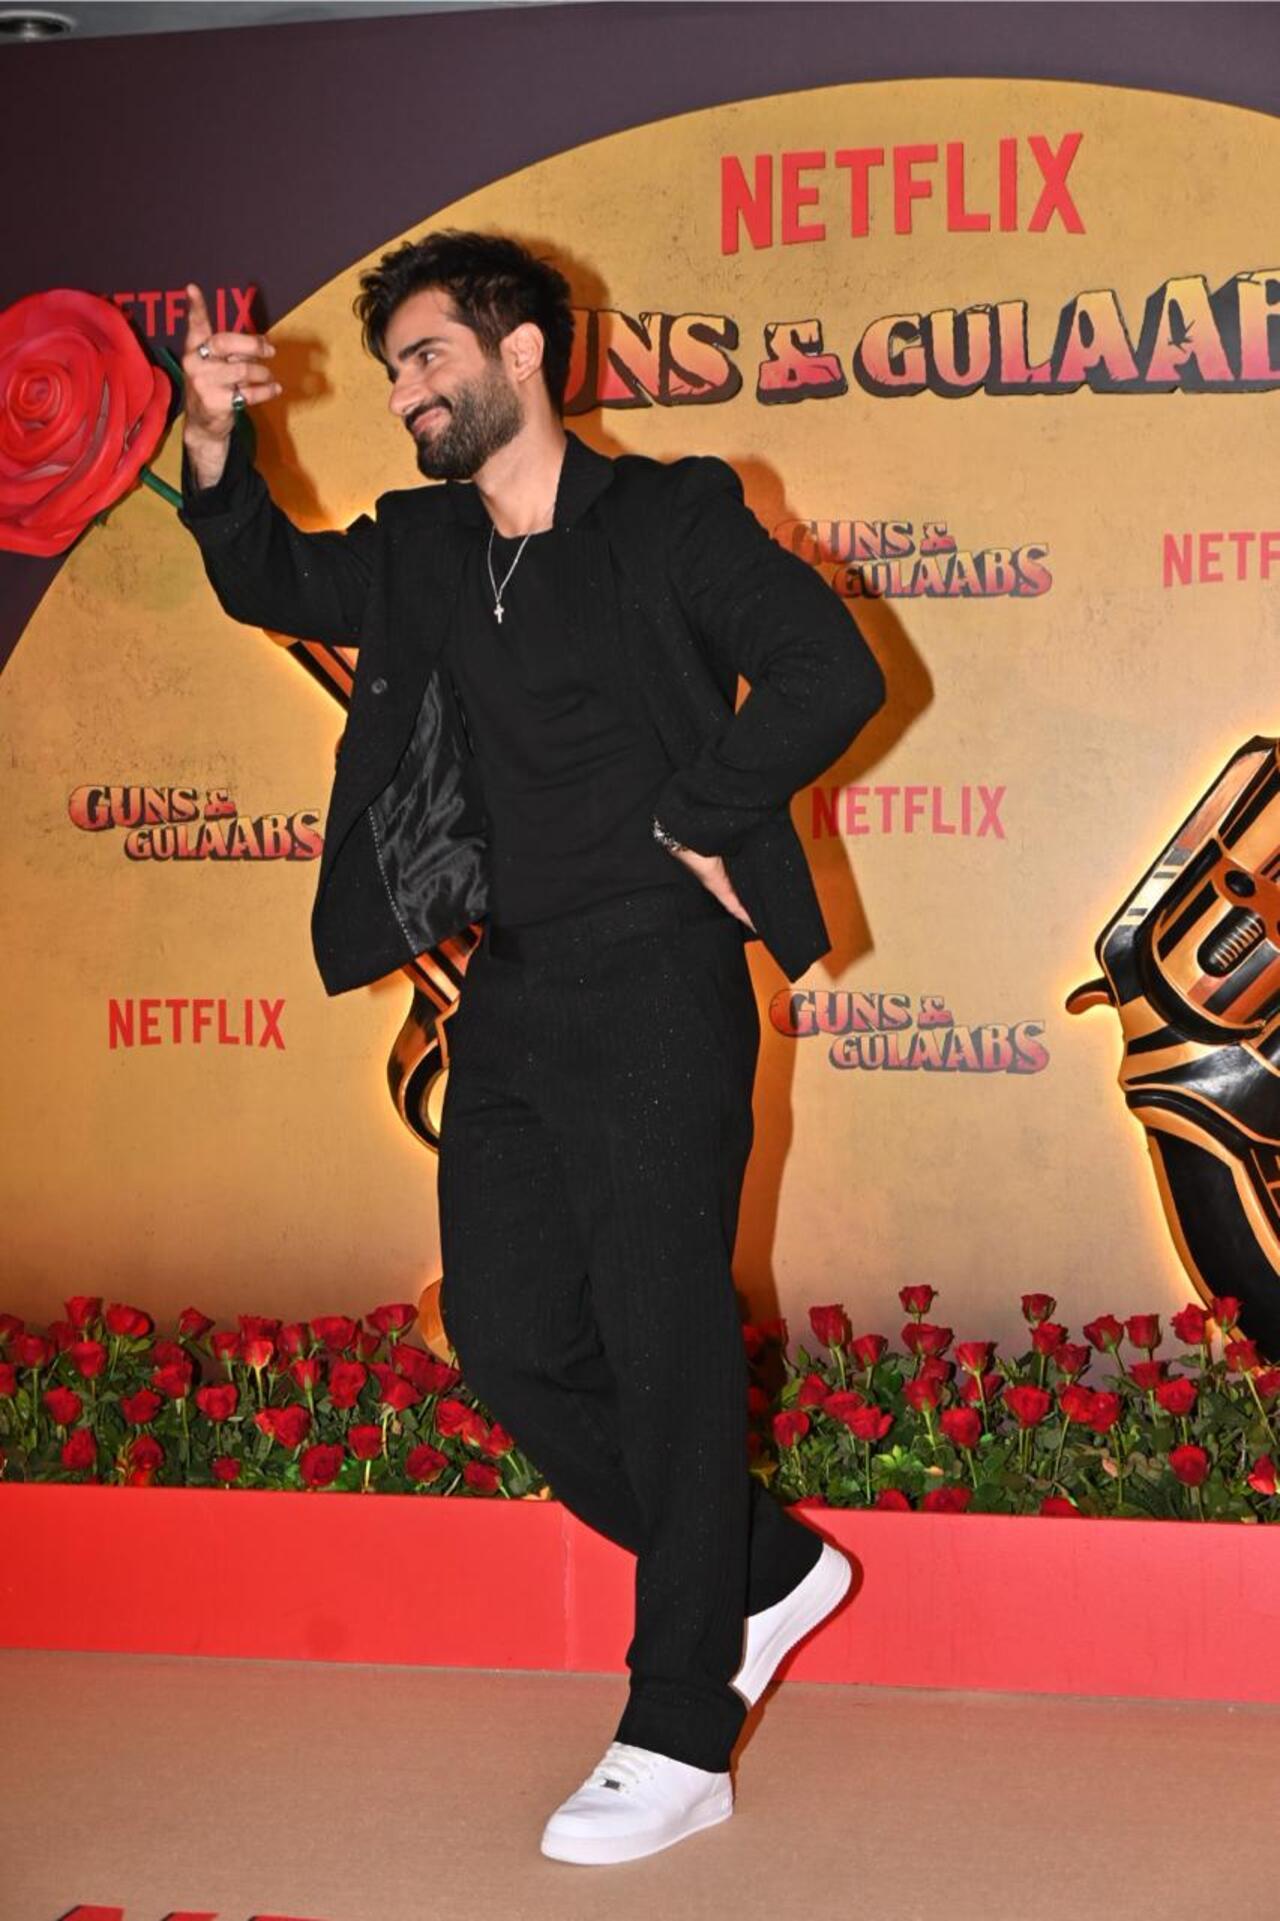 Karan Tacker looked dapper in an all-black outfit and was seen dancing as he posed for the paparazzi